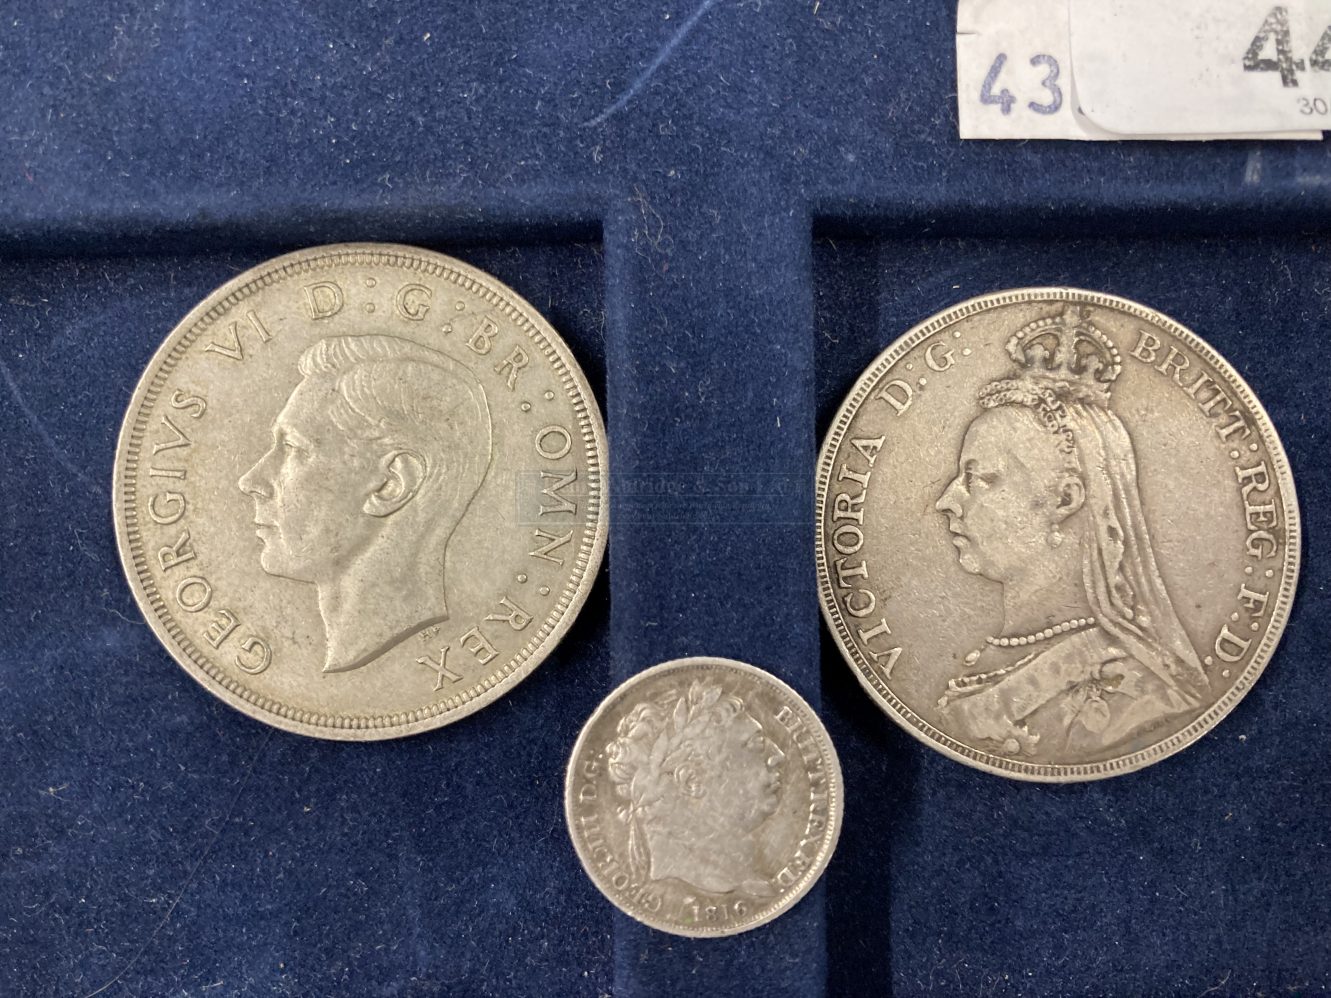 Numismatics: Crowns, 1889 George and Dragon, Young Head Crown, and a 1937 George VI Coat of Arms